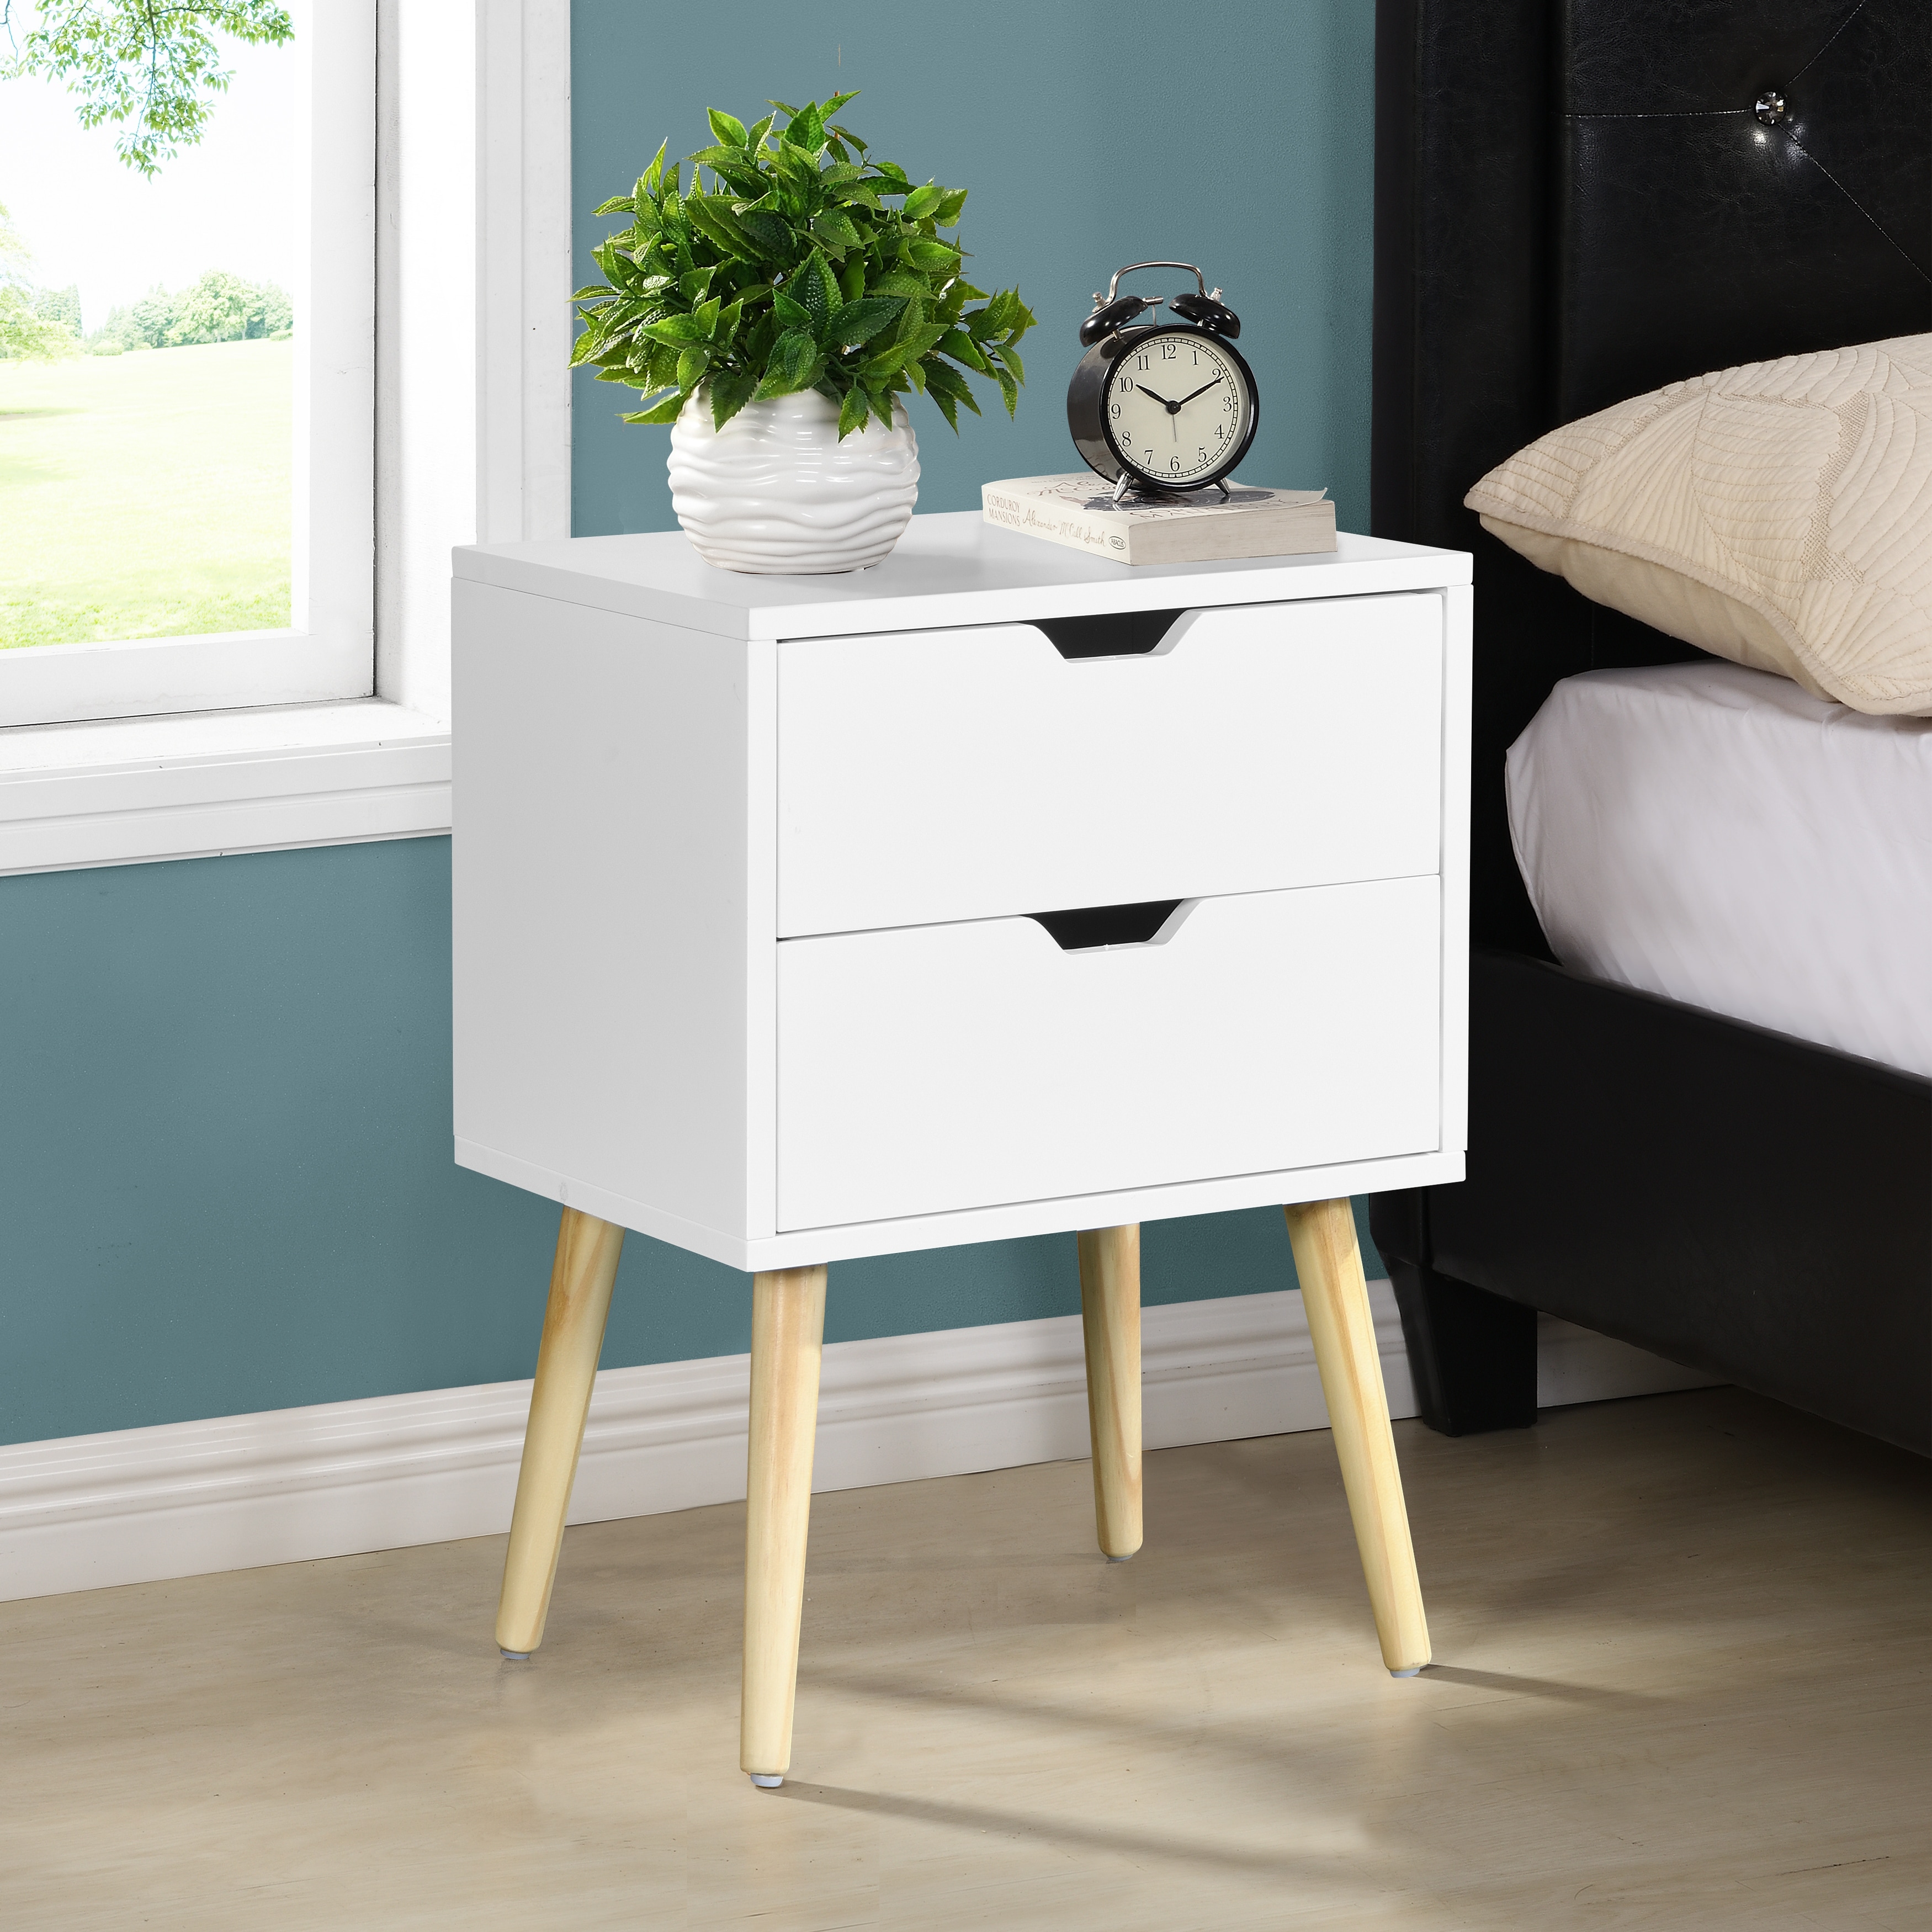 https://ak1.ostkcdn.com/images/products/is/images/direct/b6fb9a48ff0d30c83b5ccfe5e8e5bc20d30279b7/Side-Table-with-2-Drawers-Storage-Cabinet-Bedroom-Living-Room%2C-White.jpg